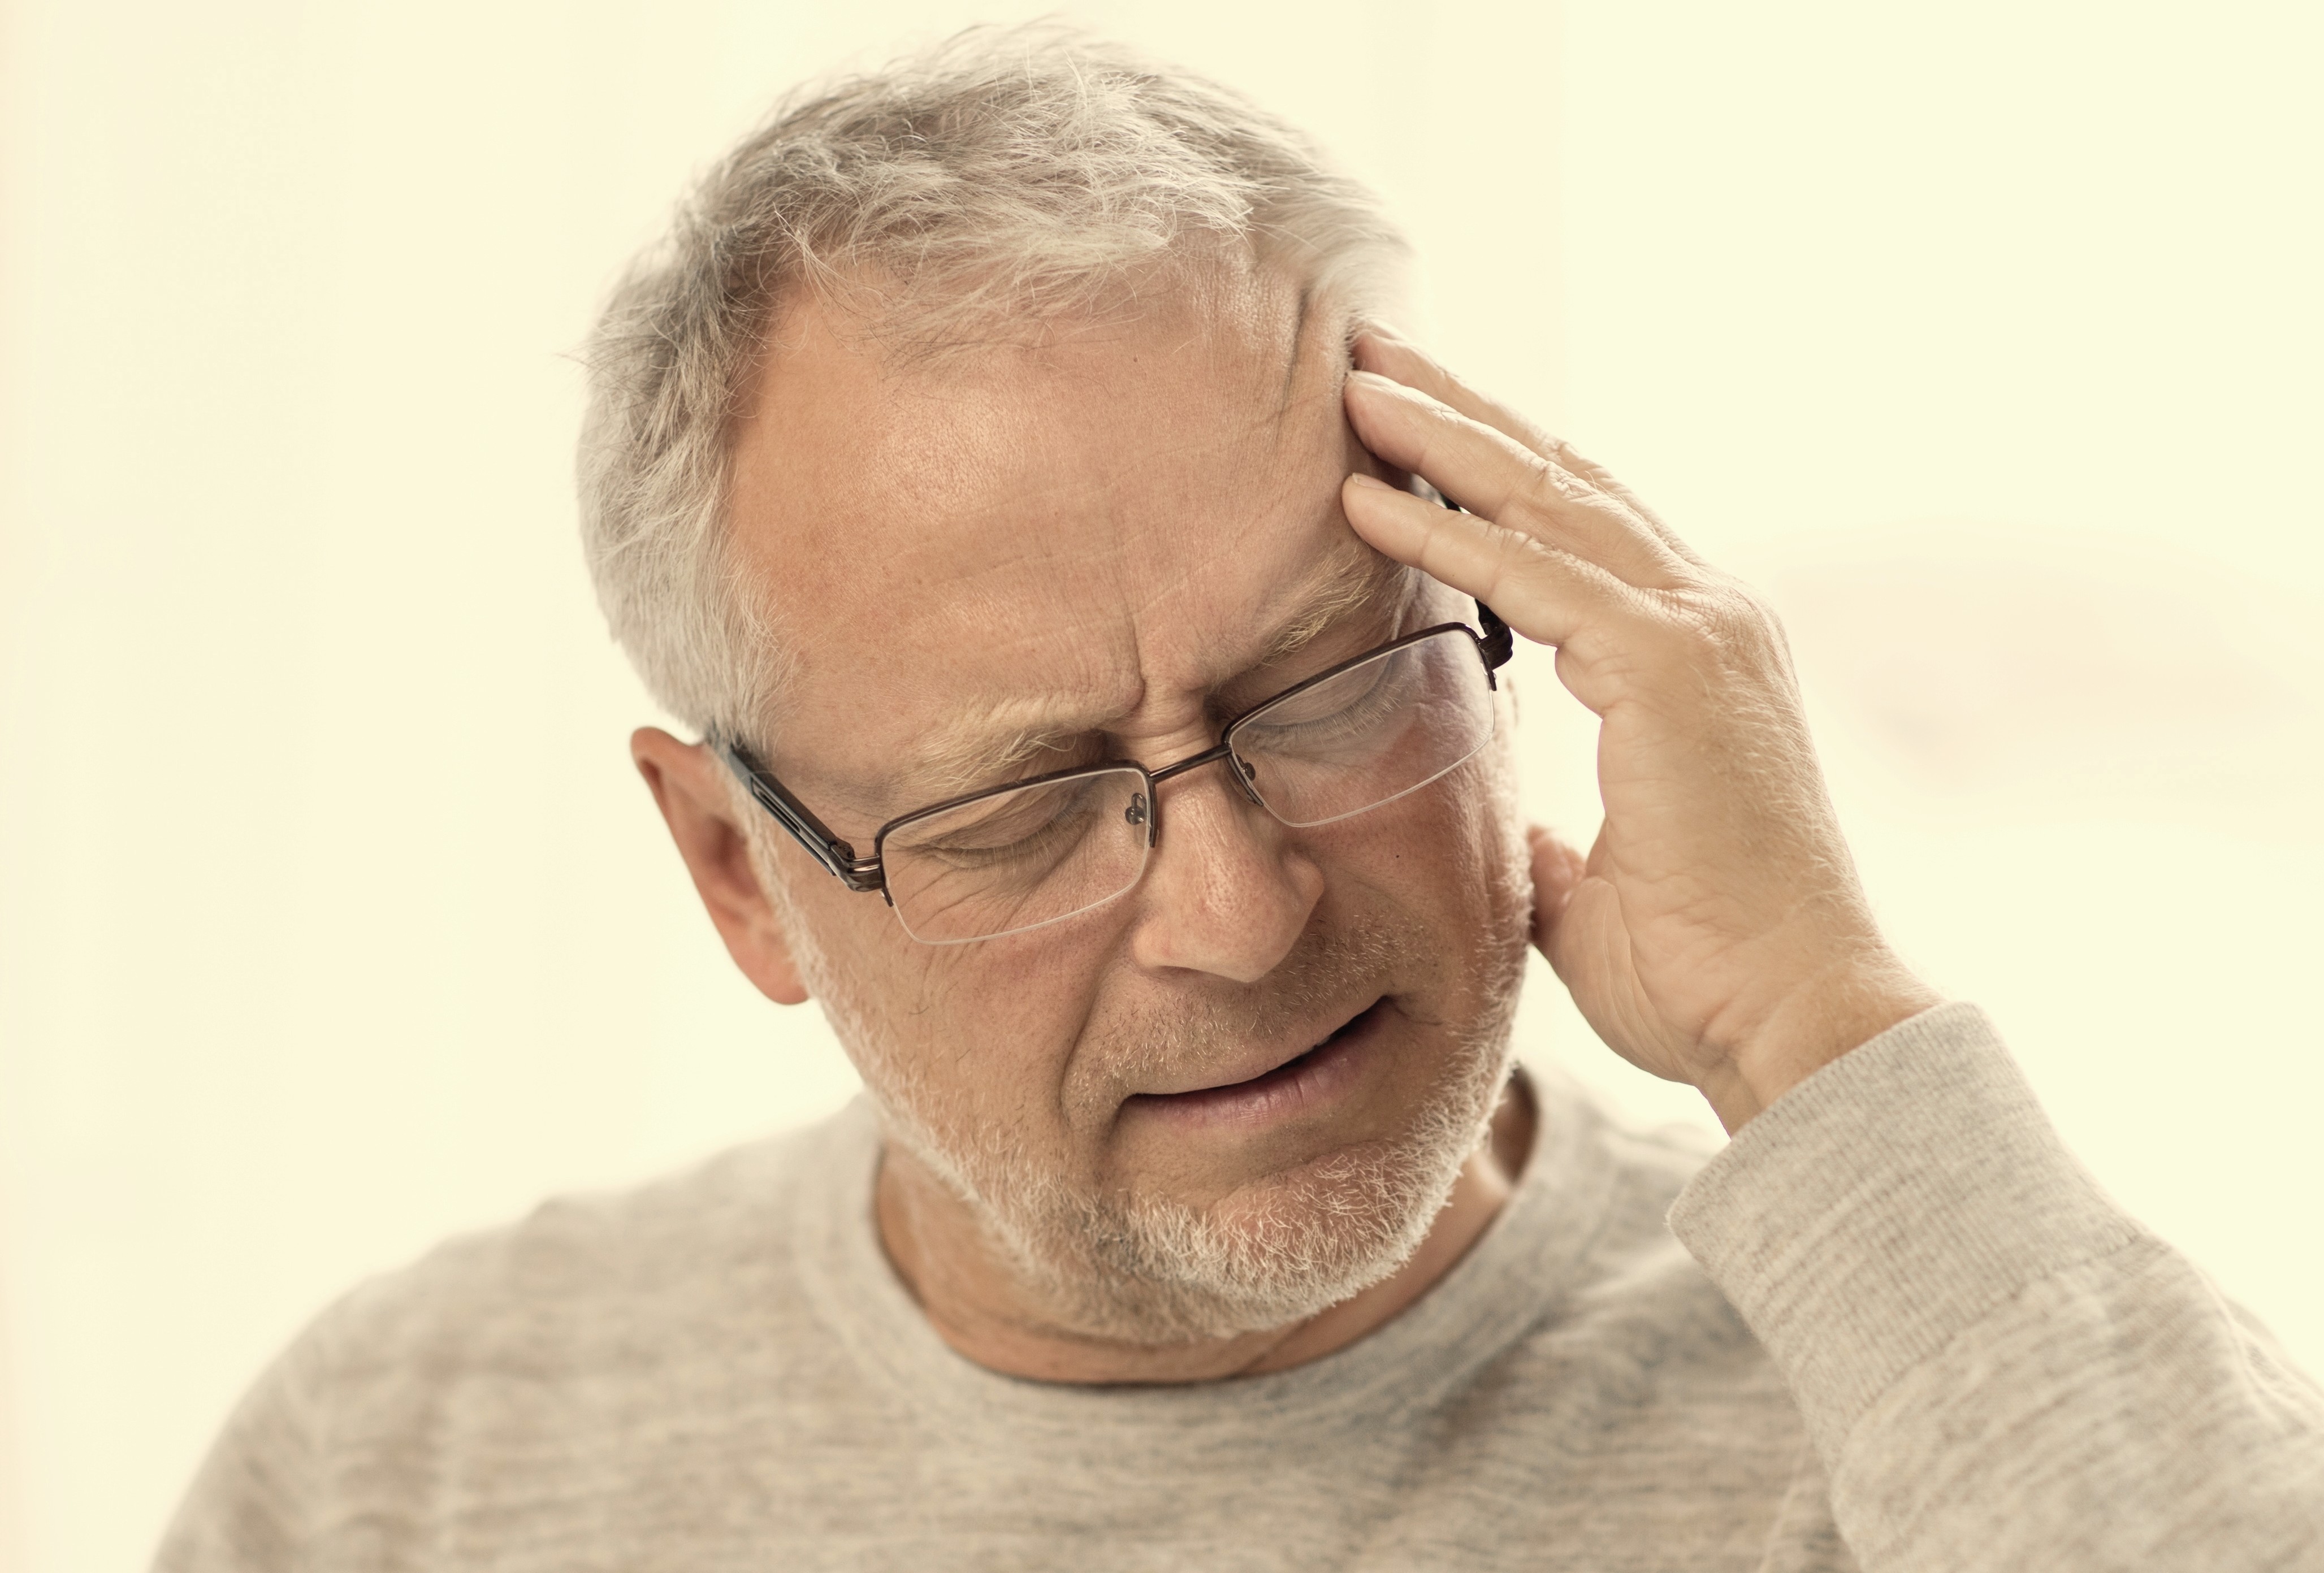 Aneurysm Headache vs. Normal Headache: Recognizing the Difference